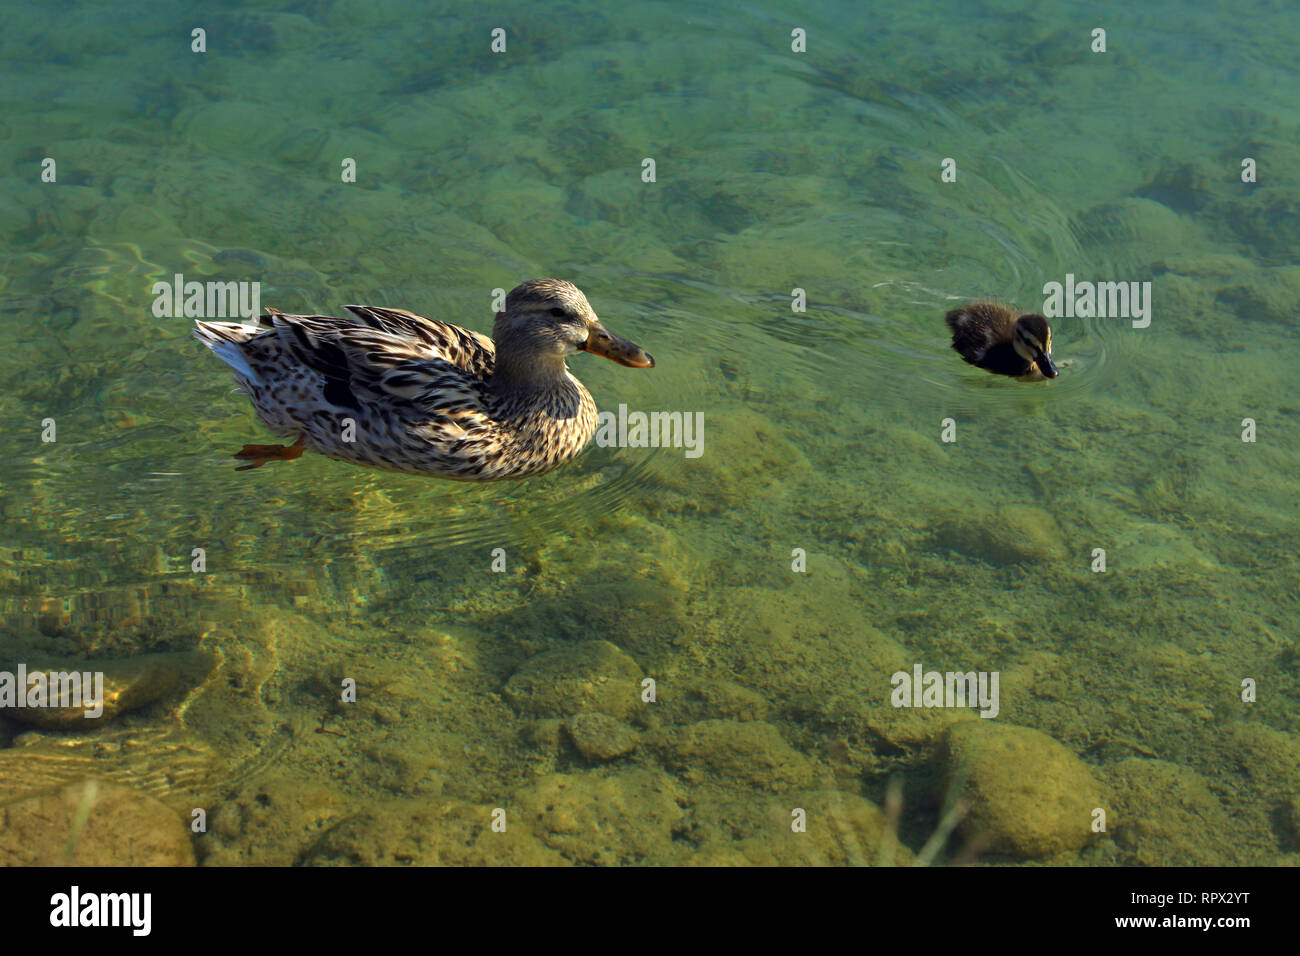 Female duck and duckling in a river, Turkey Stock Photo